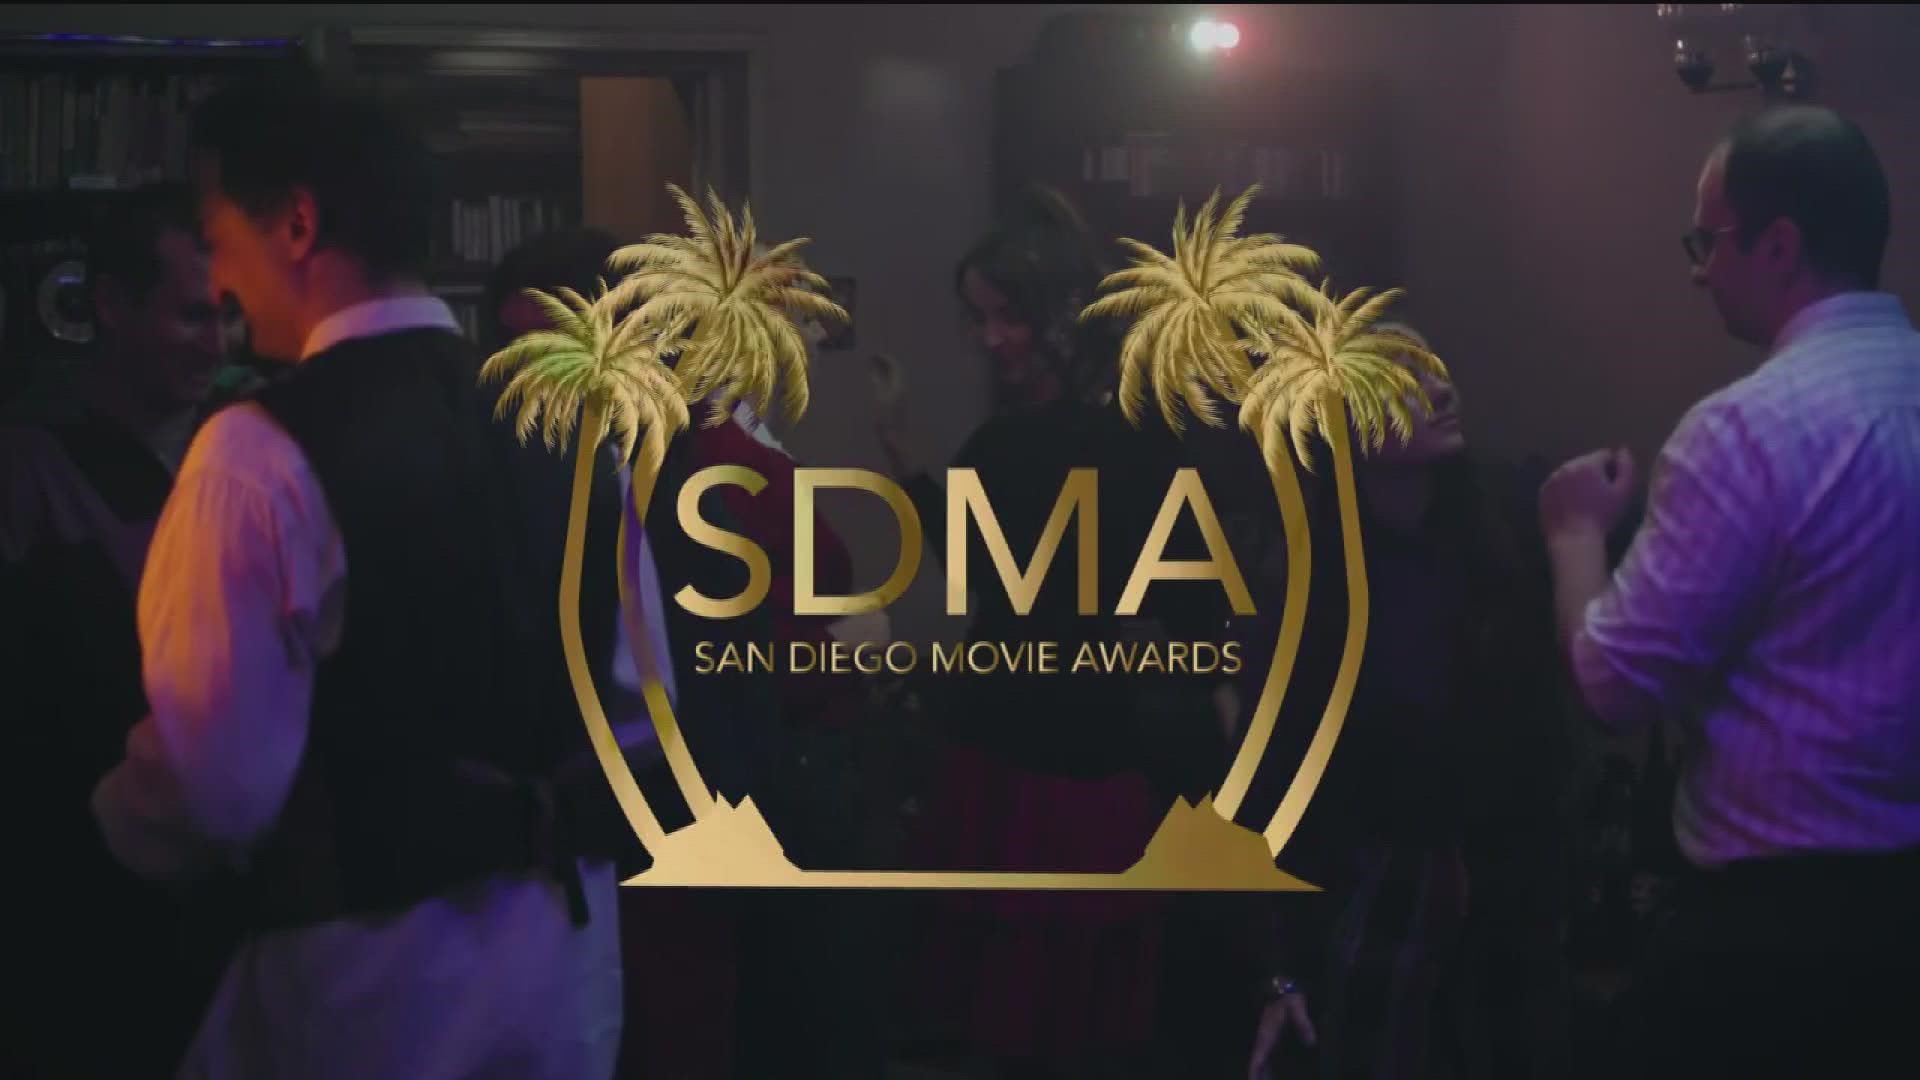 The executive director of the San Diego Movie Awards shares details of the event.